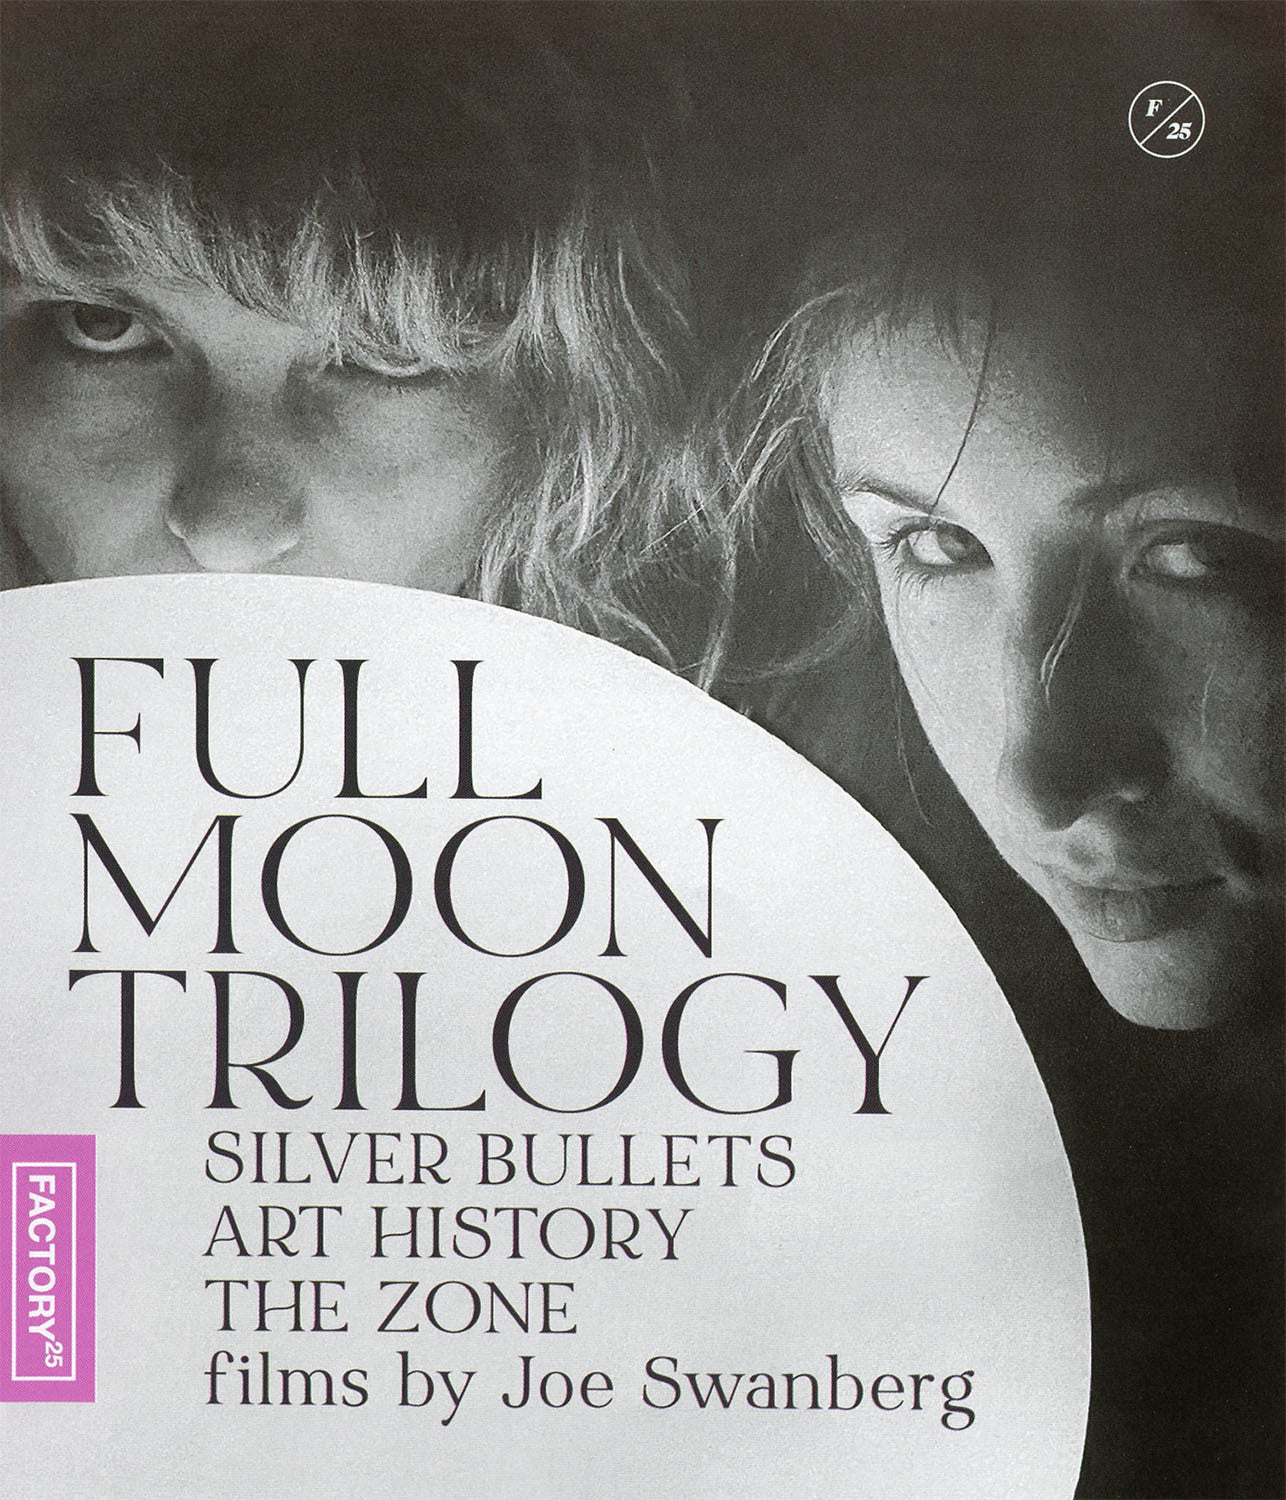 Full Moon Trilogy: Limited Edition (FTF-142)(Exclusive)